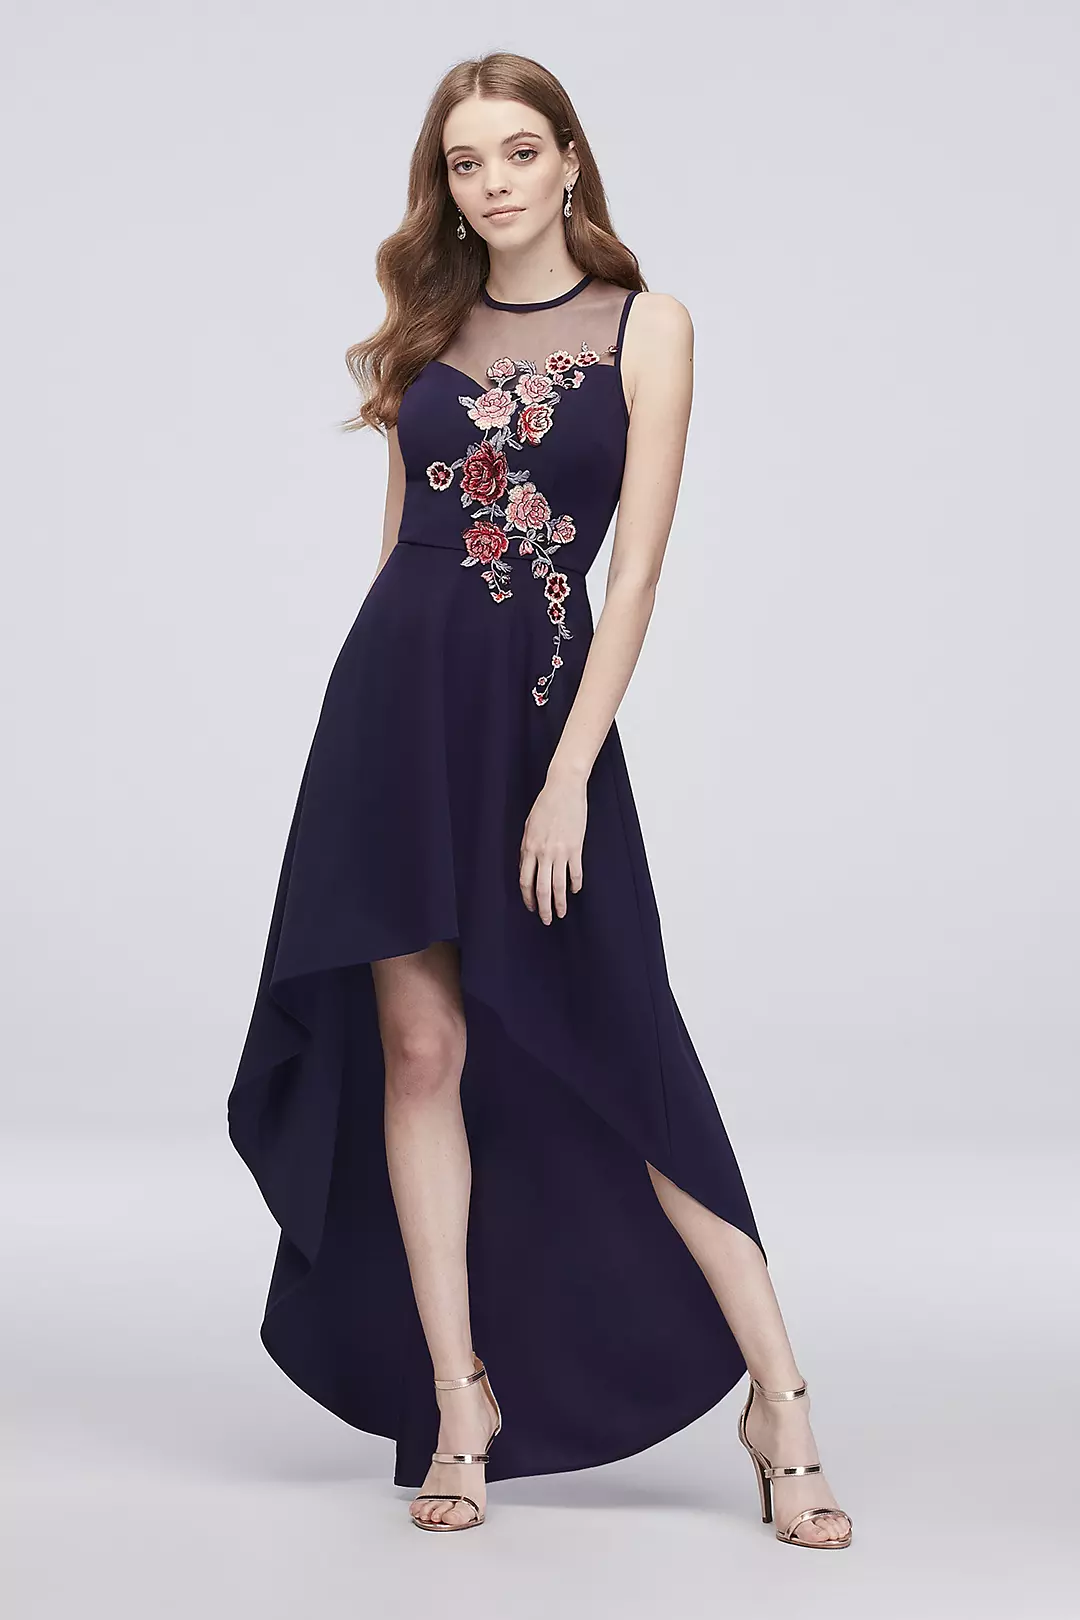 High-Low A-Line Dress with Embroidered Appliques Image